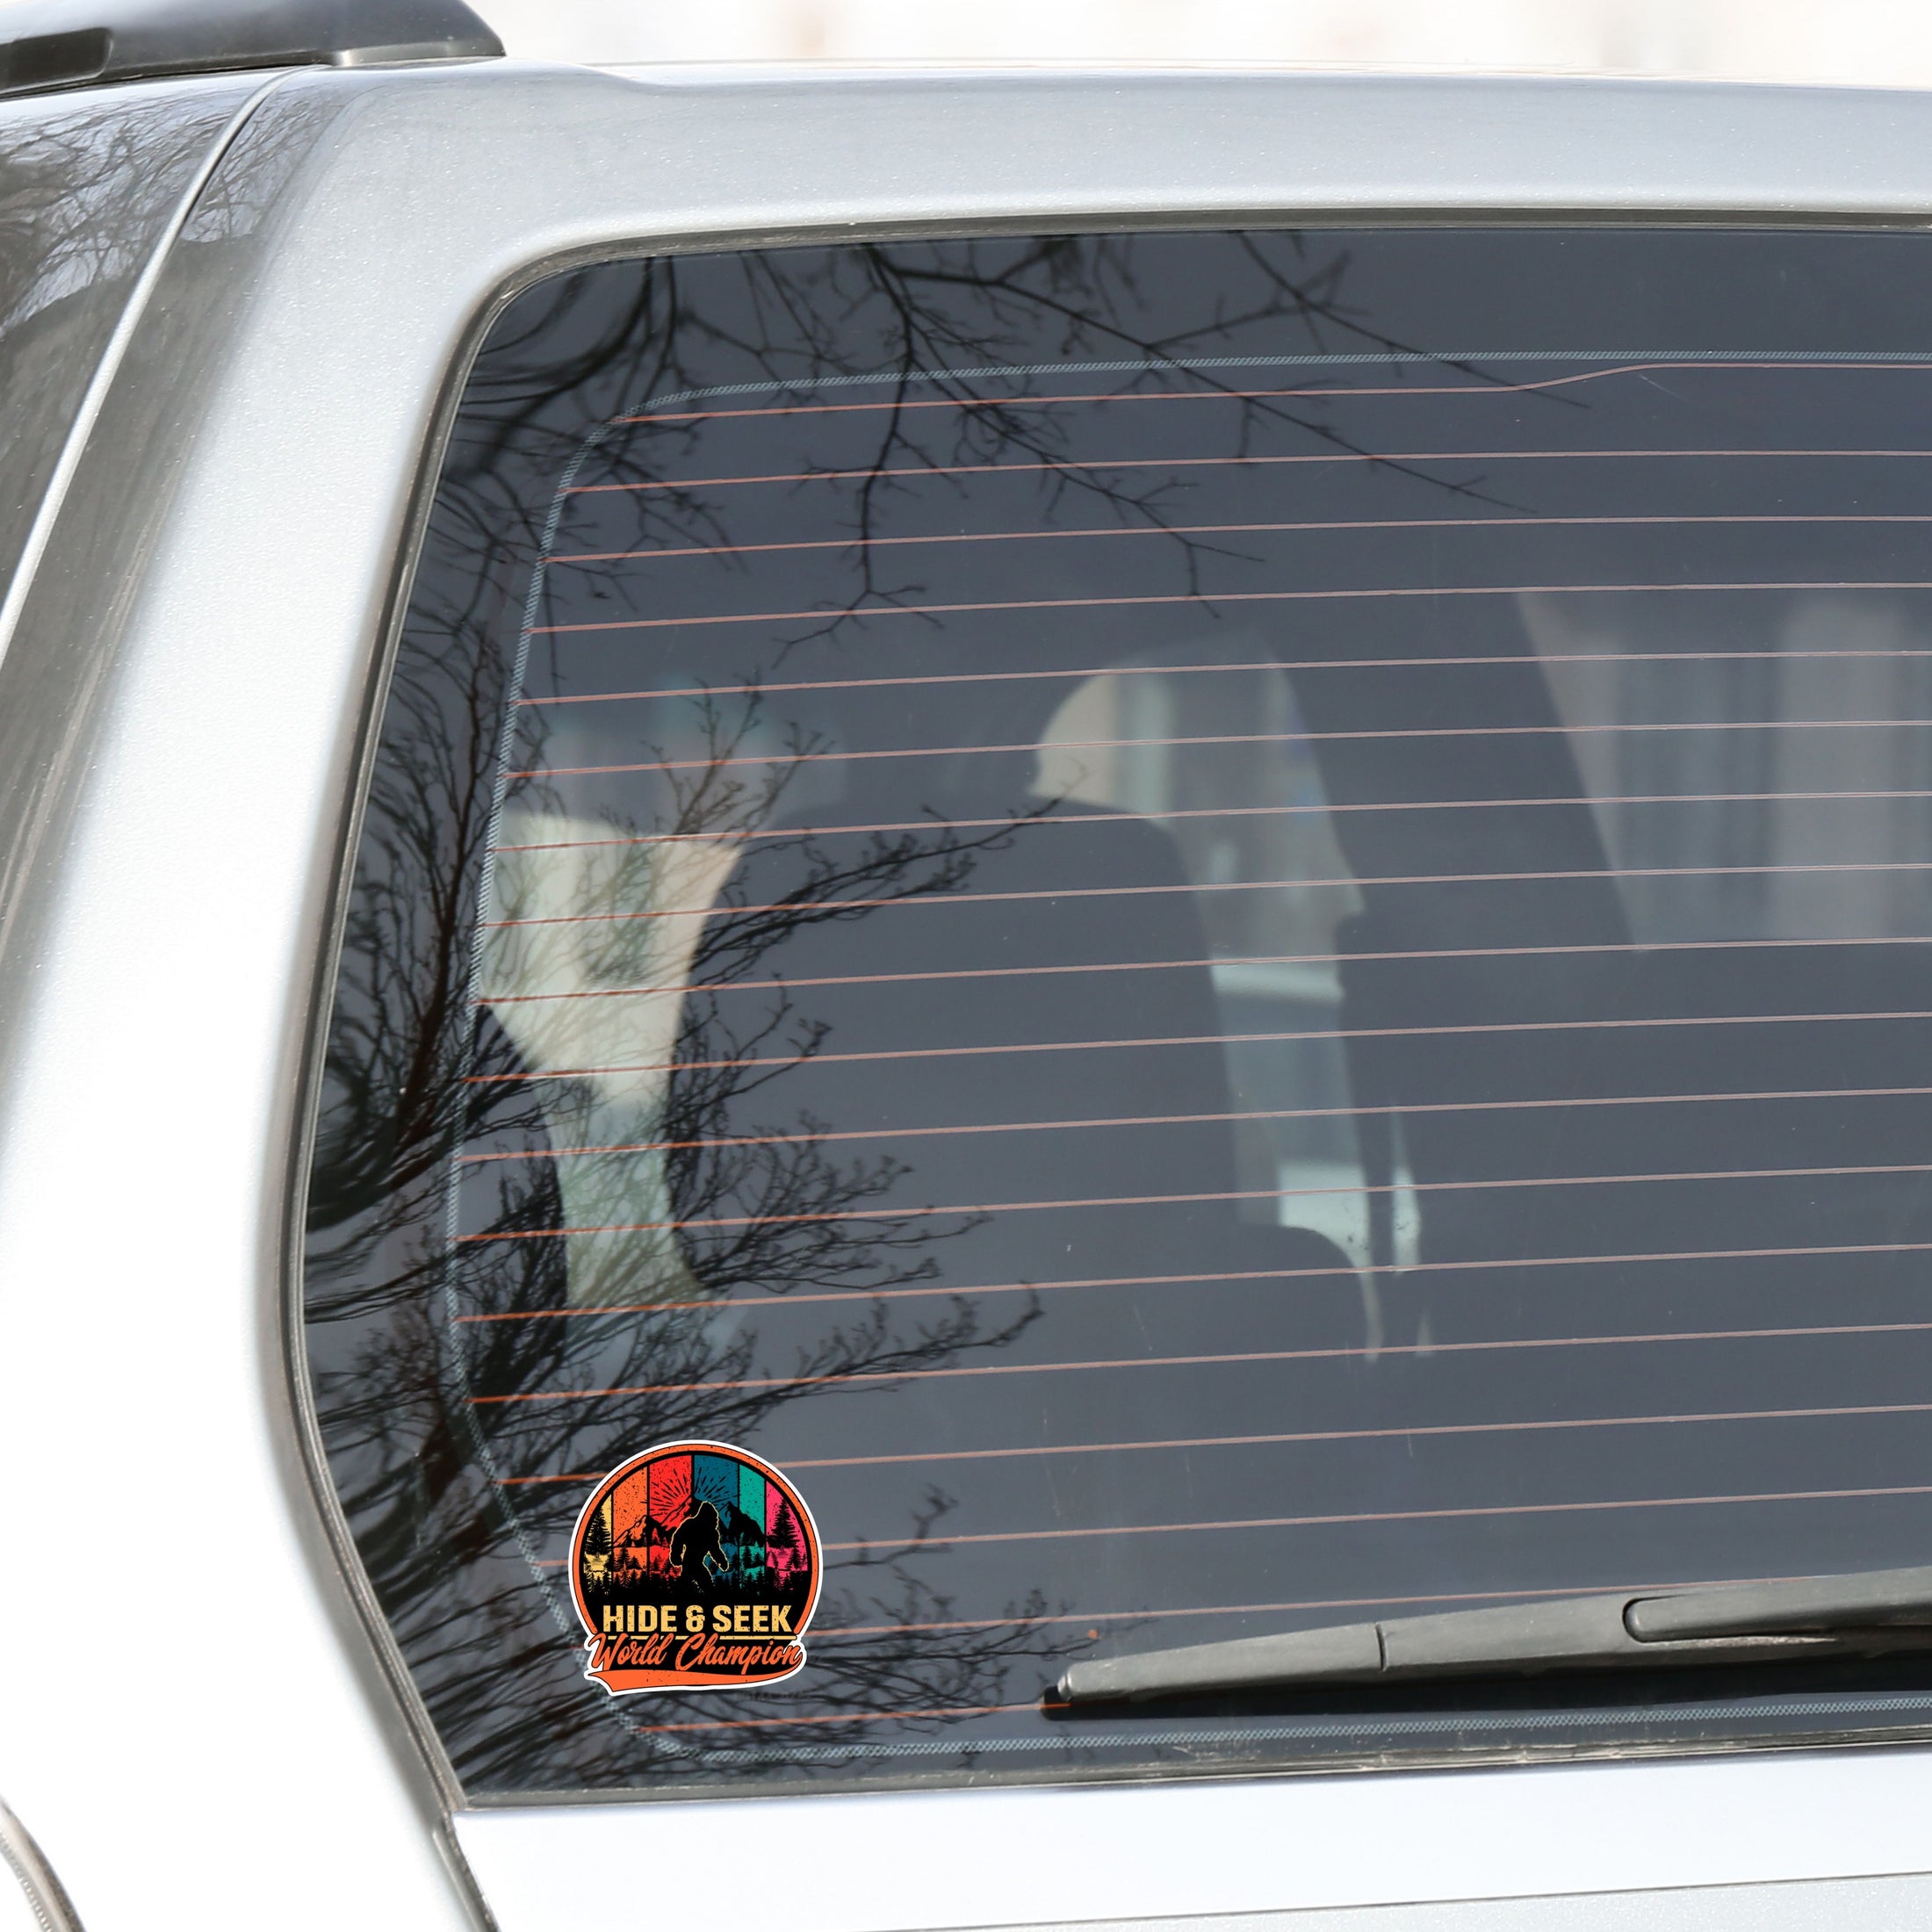 This image shows the hide & seek sticker on the back window of a car.